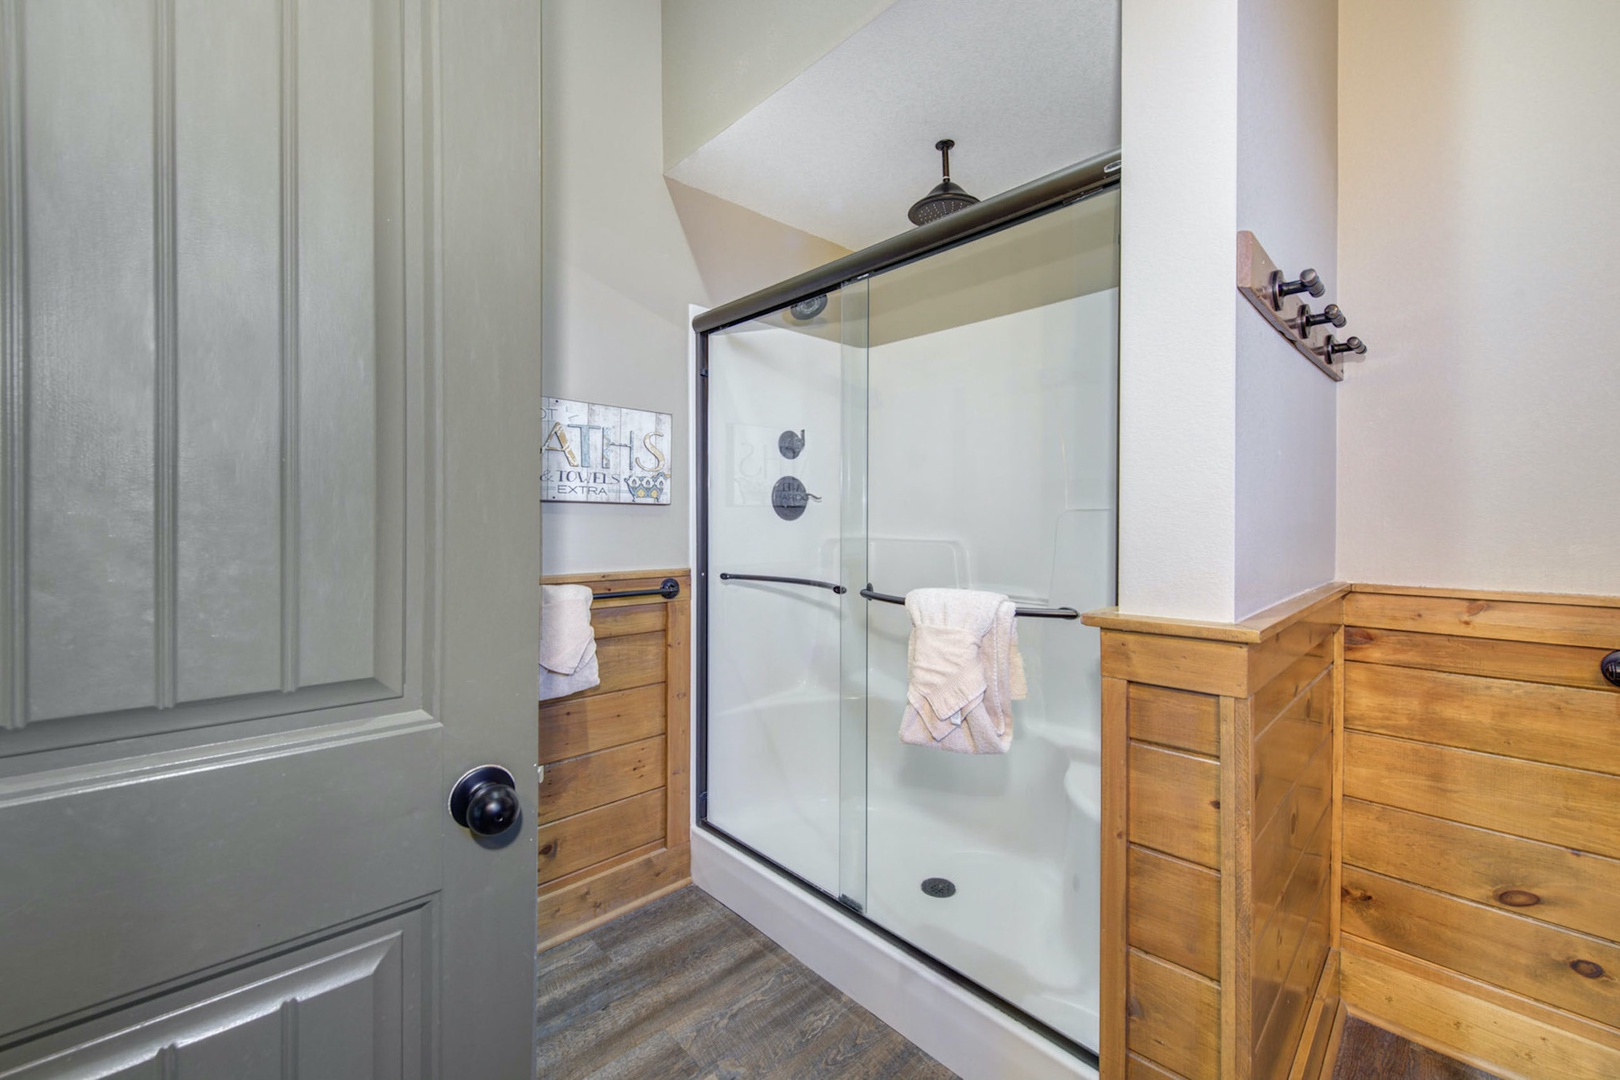 This private ensuite offers an oversized vanity, shower, & soaking tub